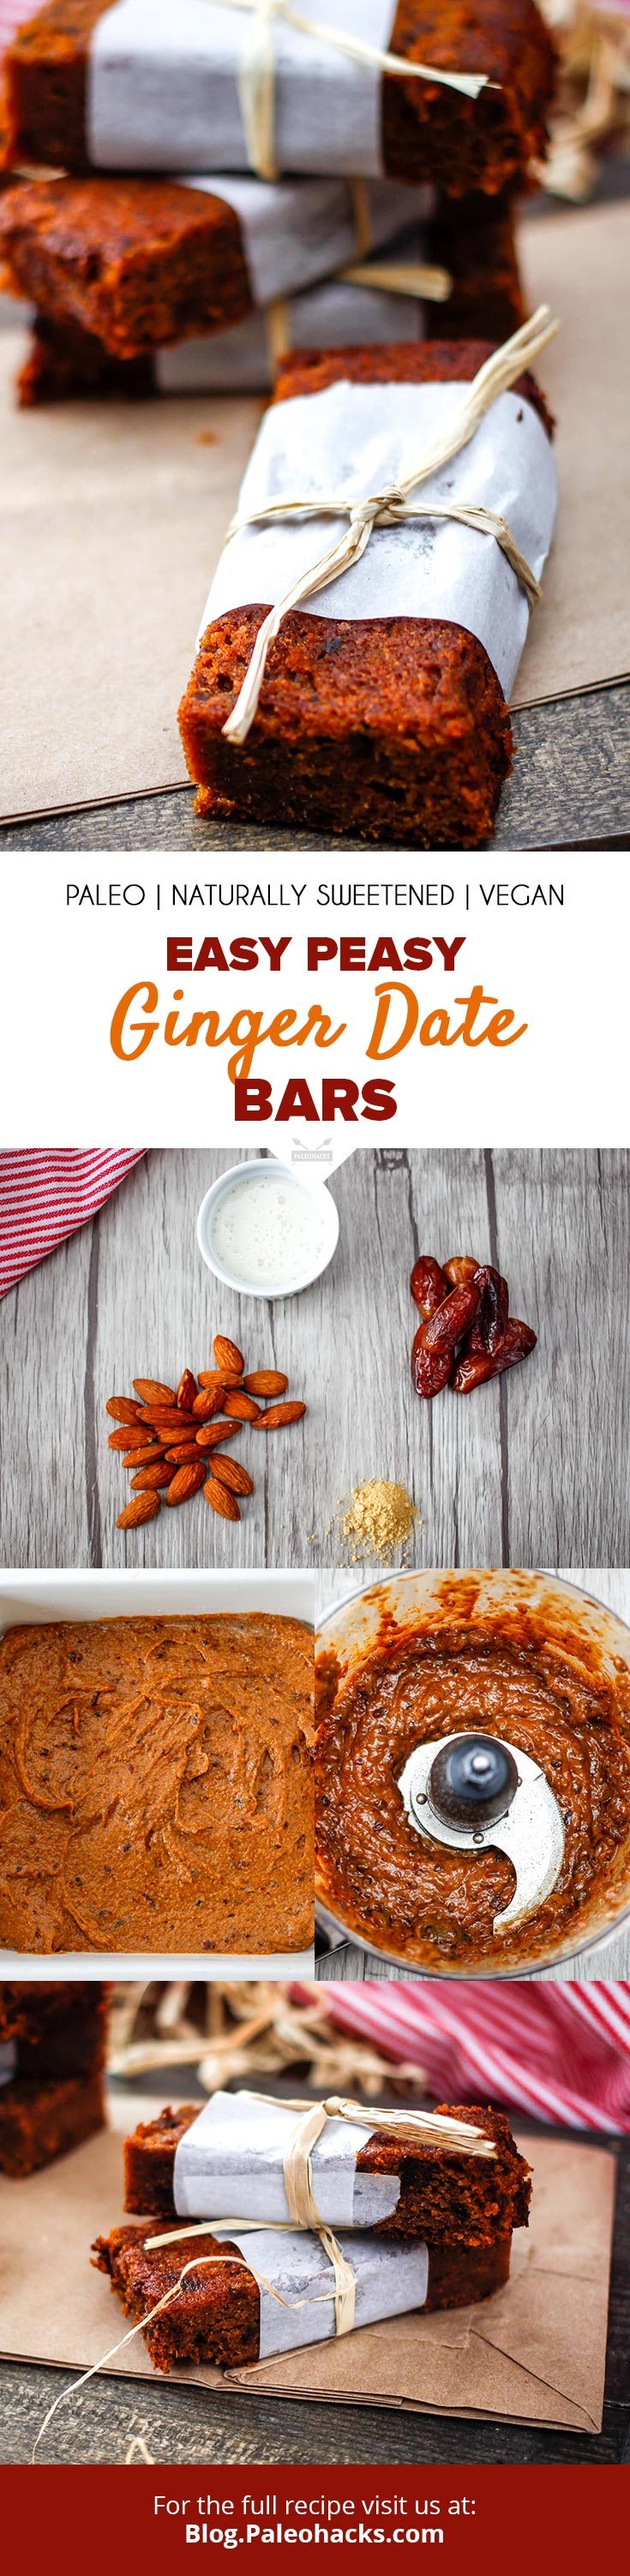 Ditch sugar-packed snack bars and indulge in these rich Ginger Date Bars for a wholesome snack that balances both taste and nutrition.